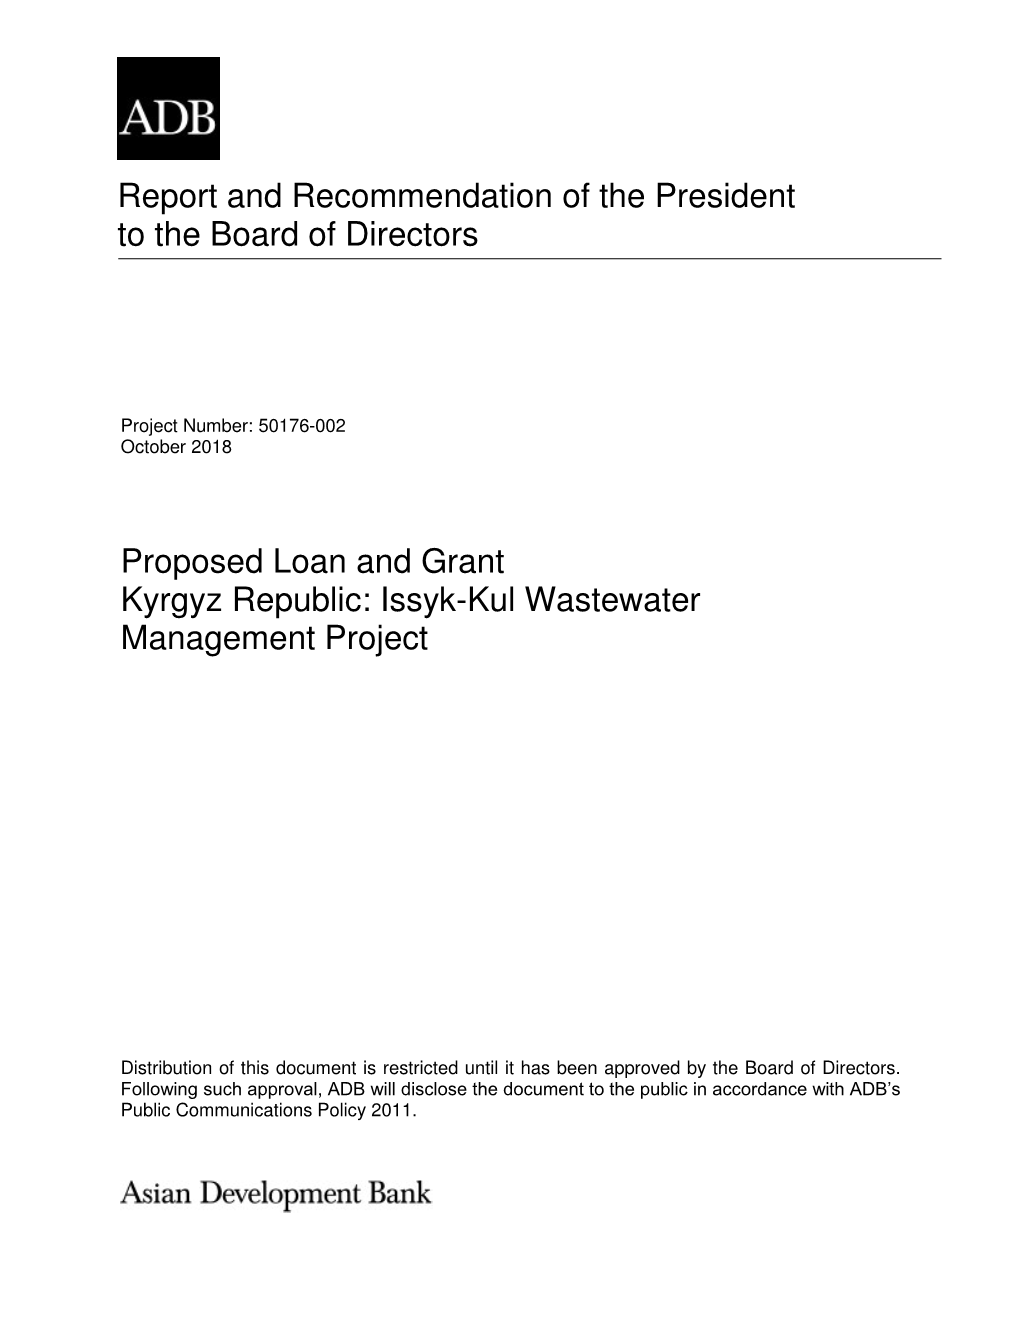 Issyk-Kul Wastewater Management Project